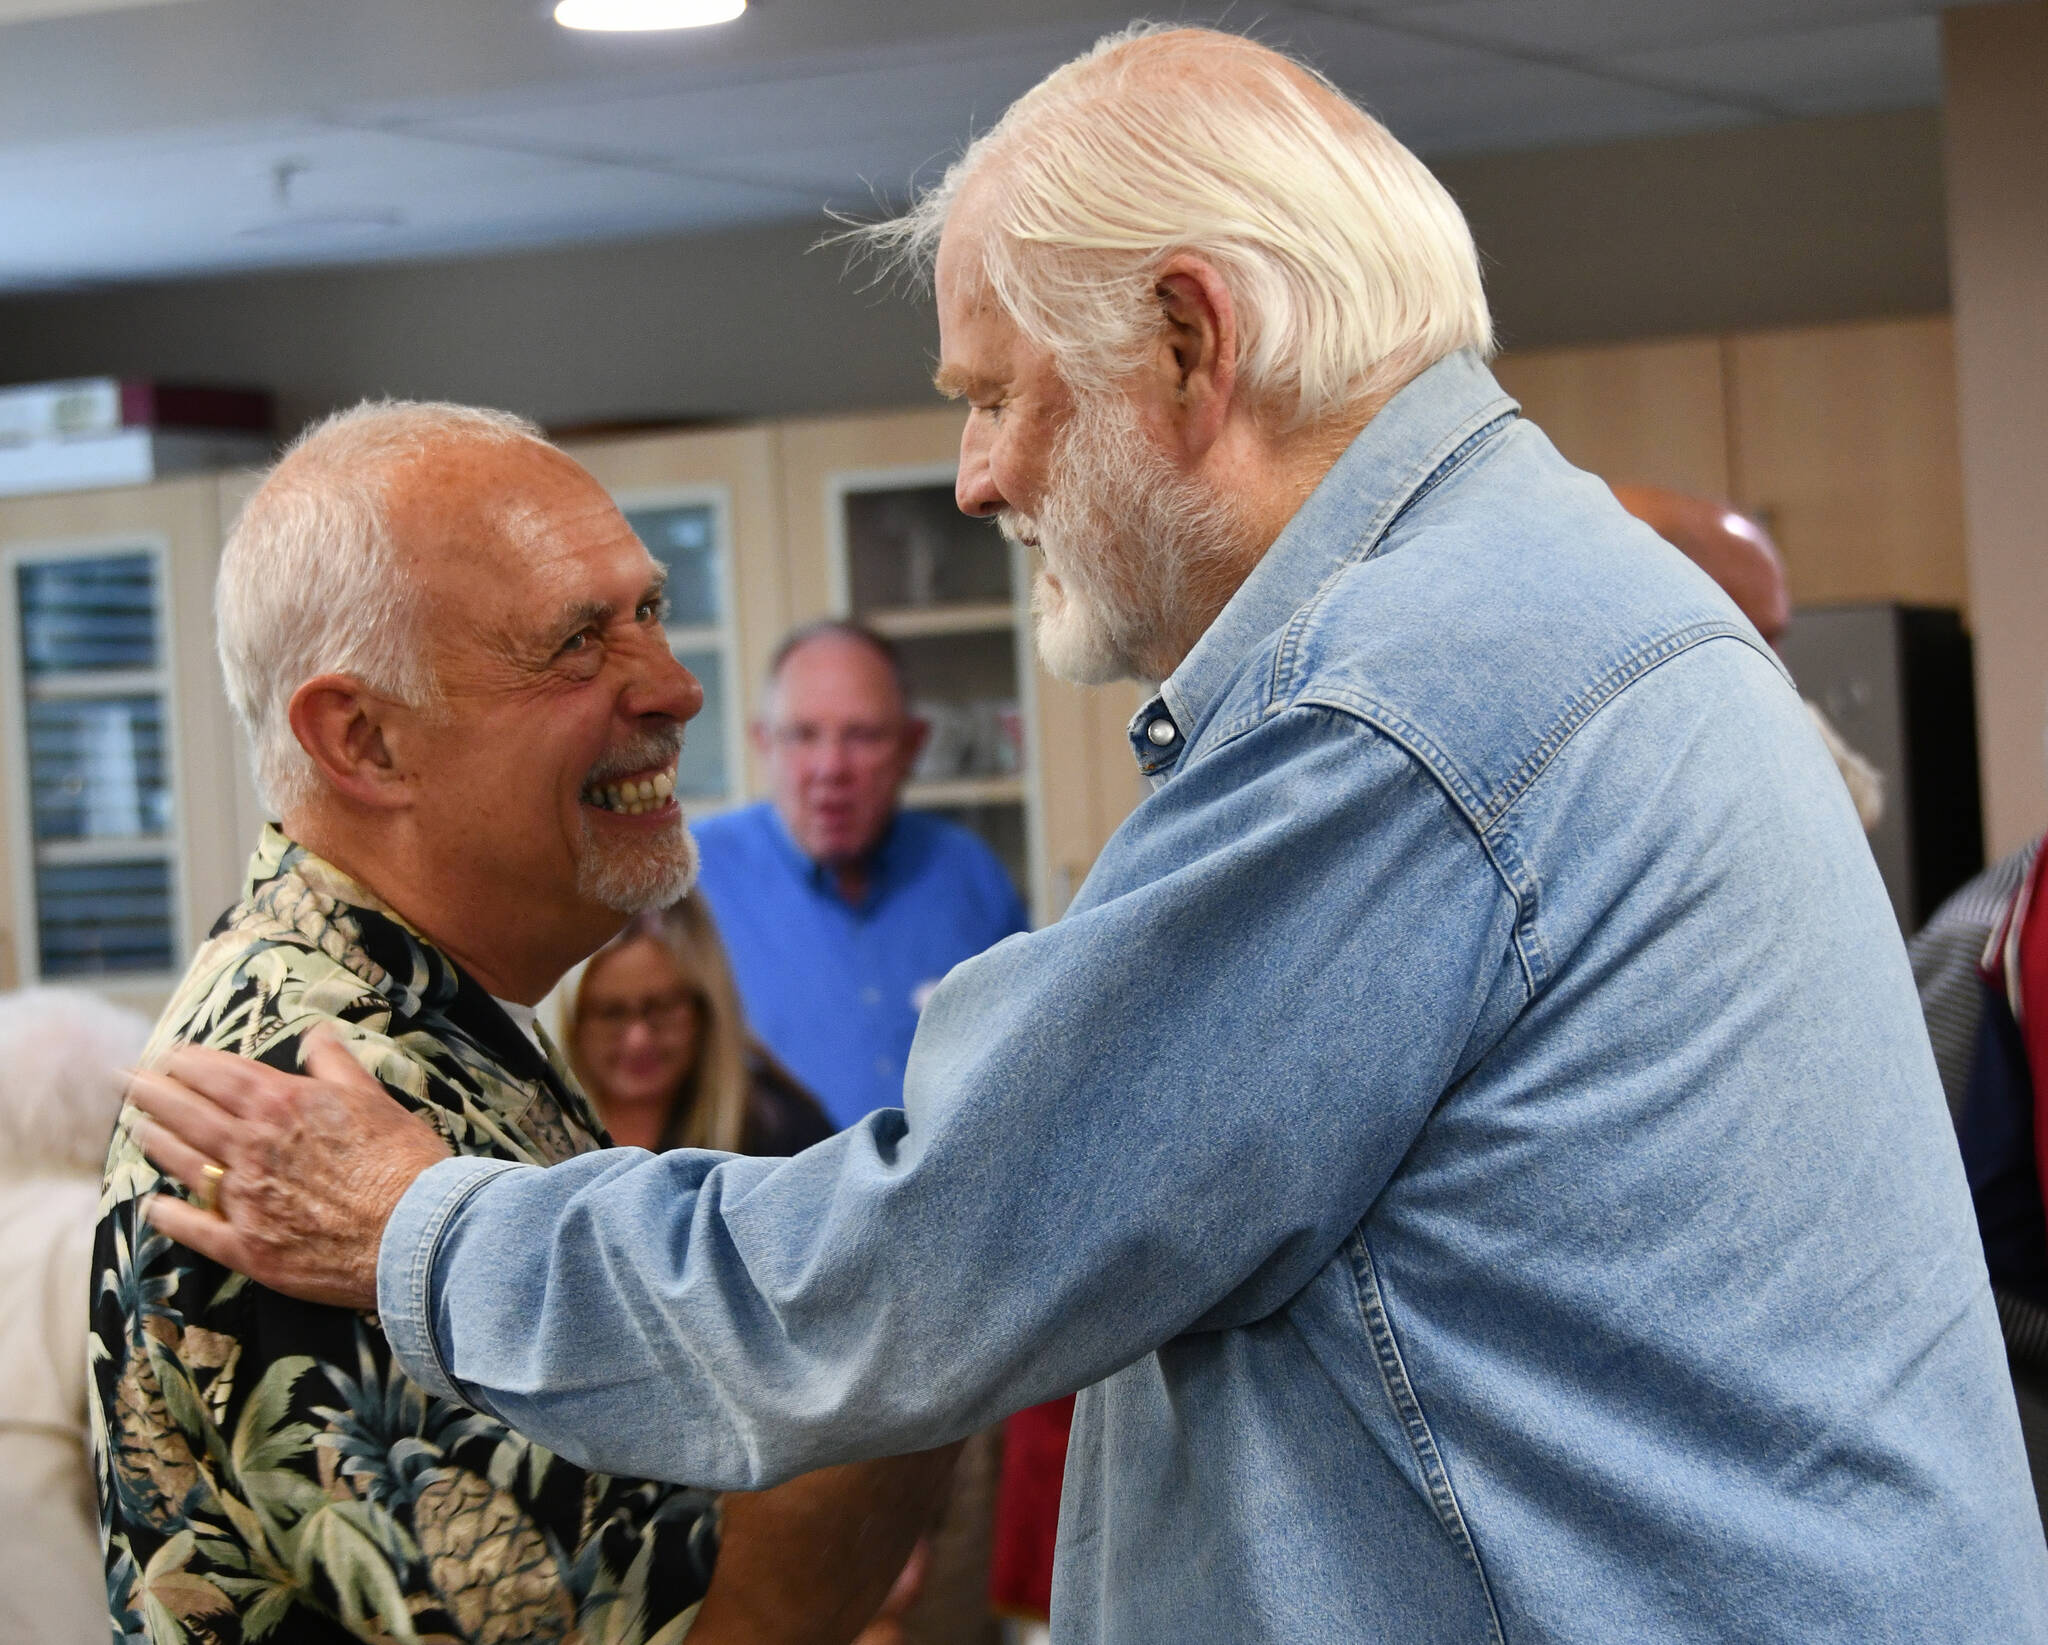 Chaplain Greg Asimakoupoulos, left, chats with Dick Sundholm at the chaplain’s retirement celebration on June 21 at Covenant Living at the Shores on Mercer Island. Andy Nystrom/ staff photo